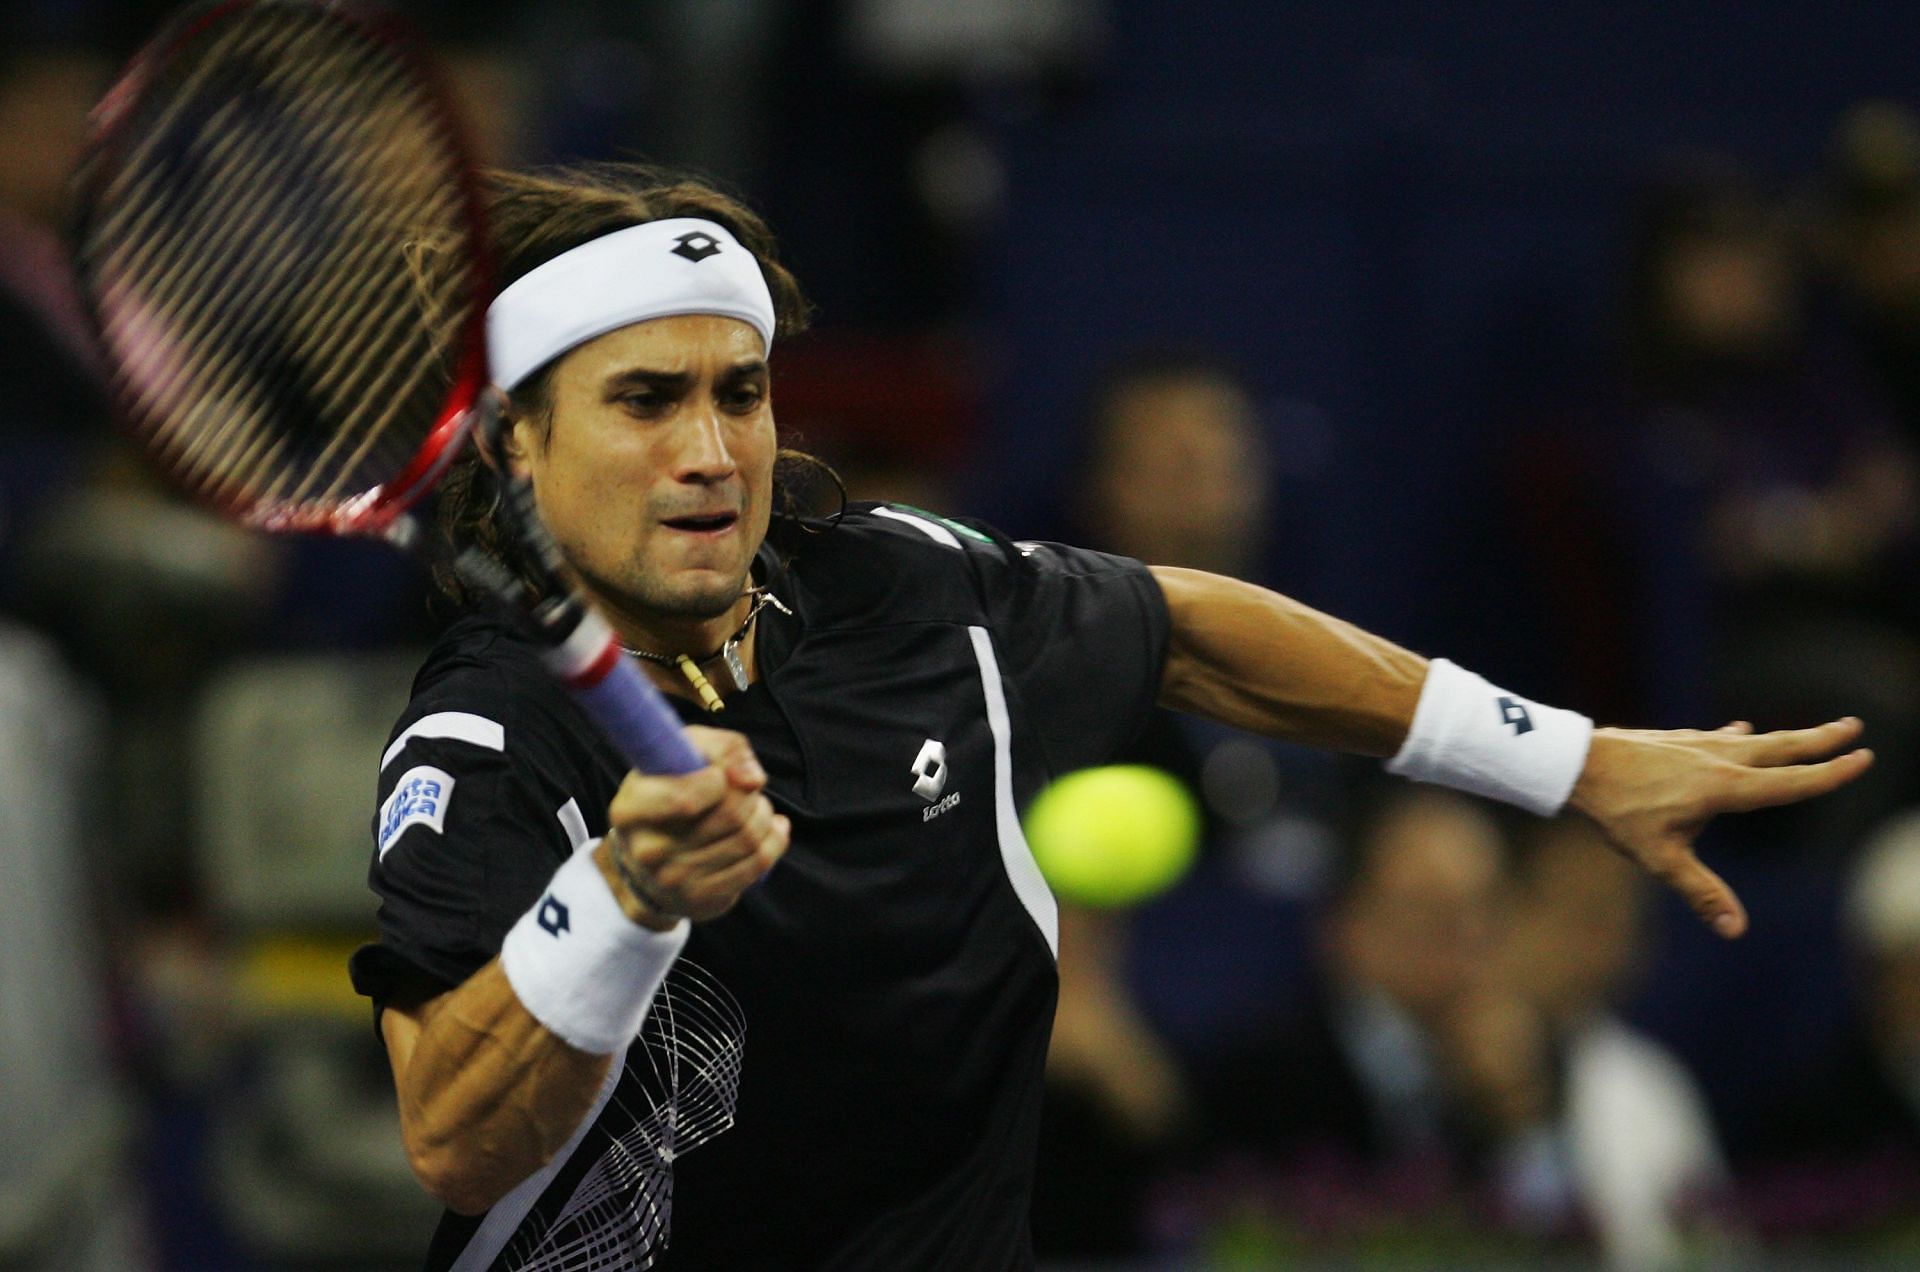 David Ferrer at the Tennis Masters Cup Shanghai - Finals